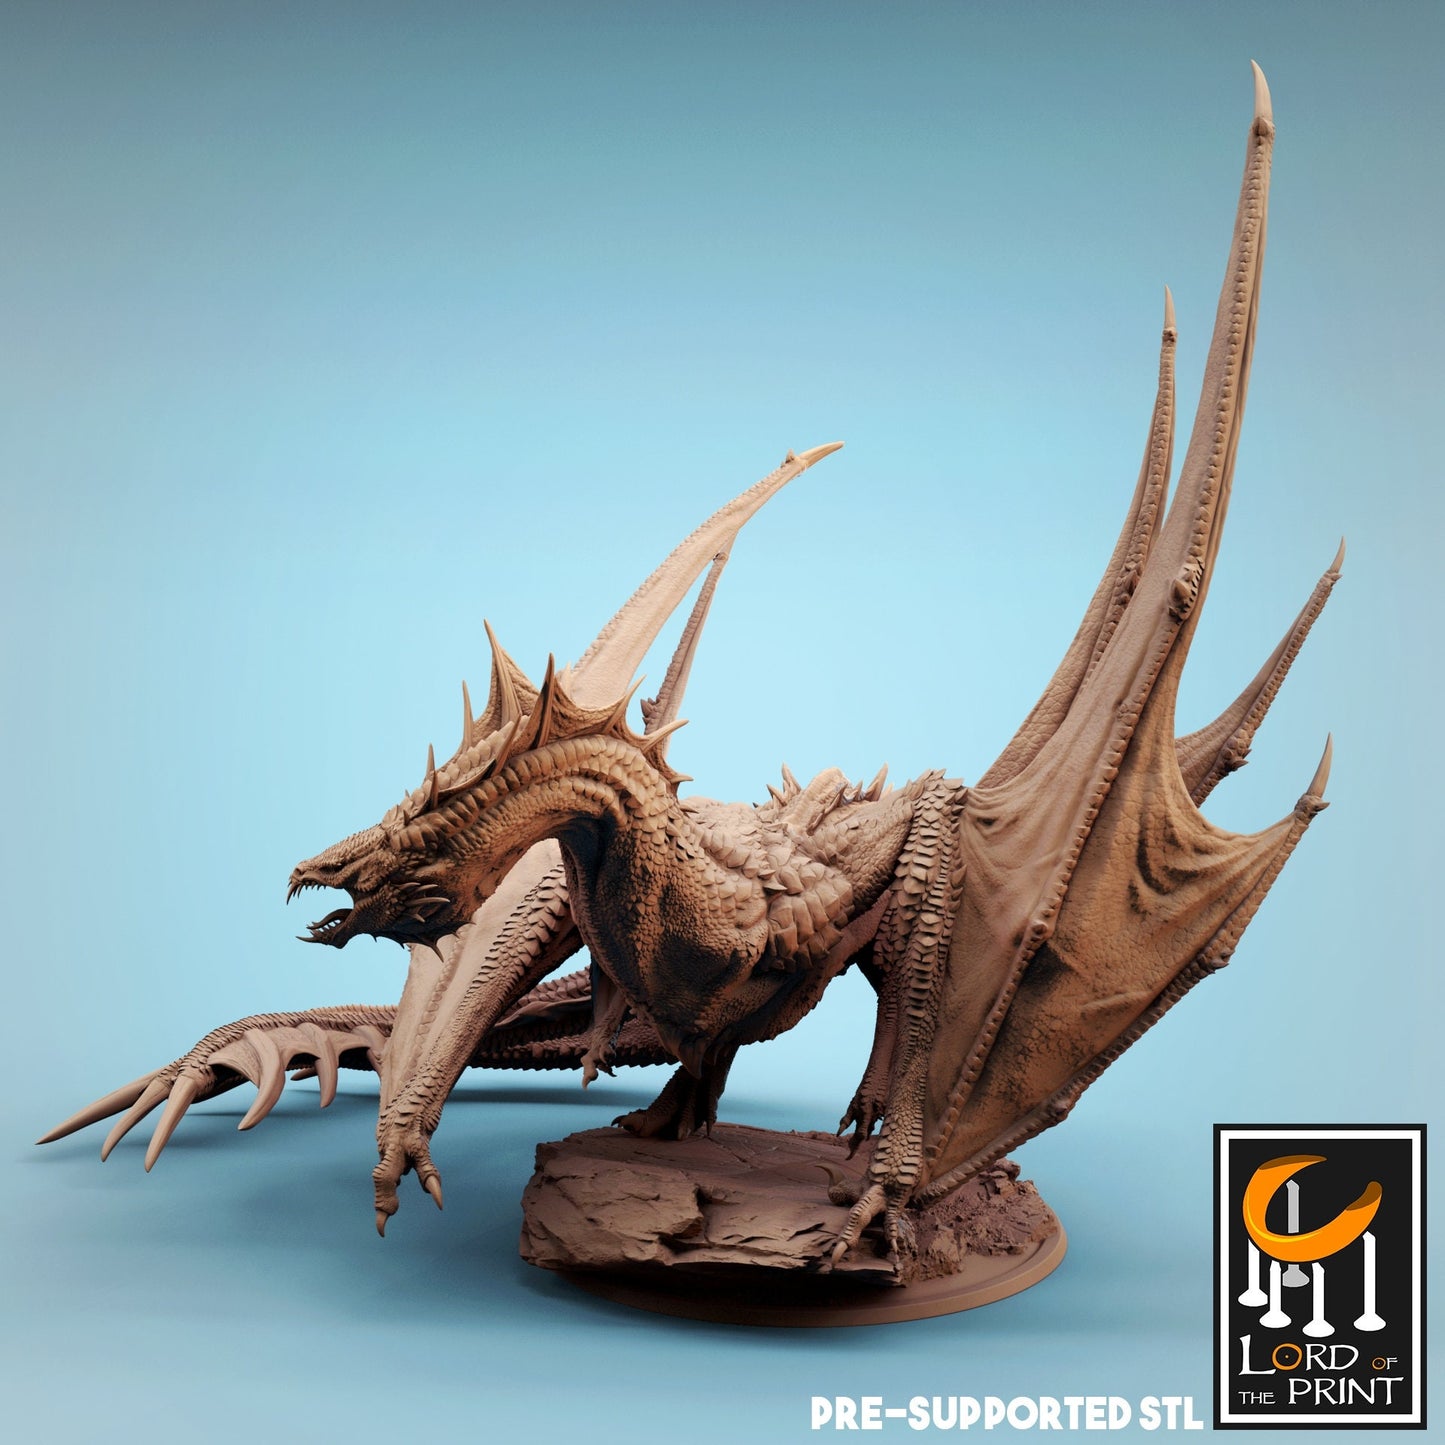 Matriarch Dragon from Lord of the Print/ Ideal for Dungeons and Dragons/ D&D / Wargaming